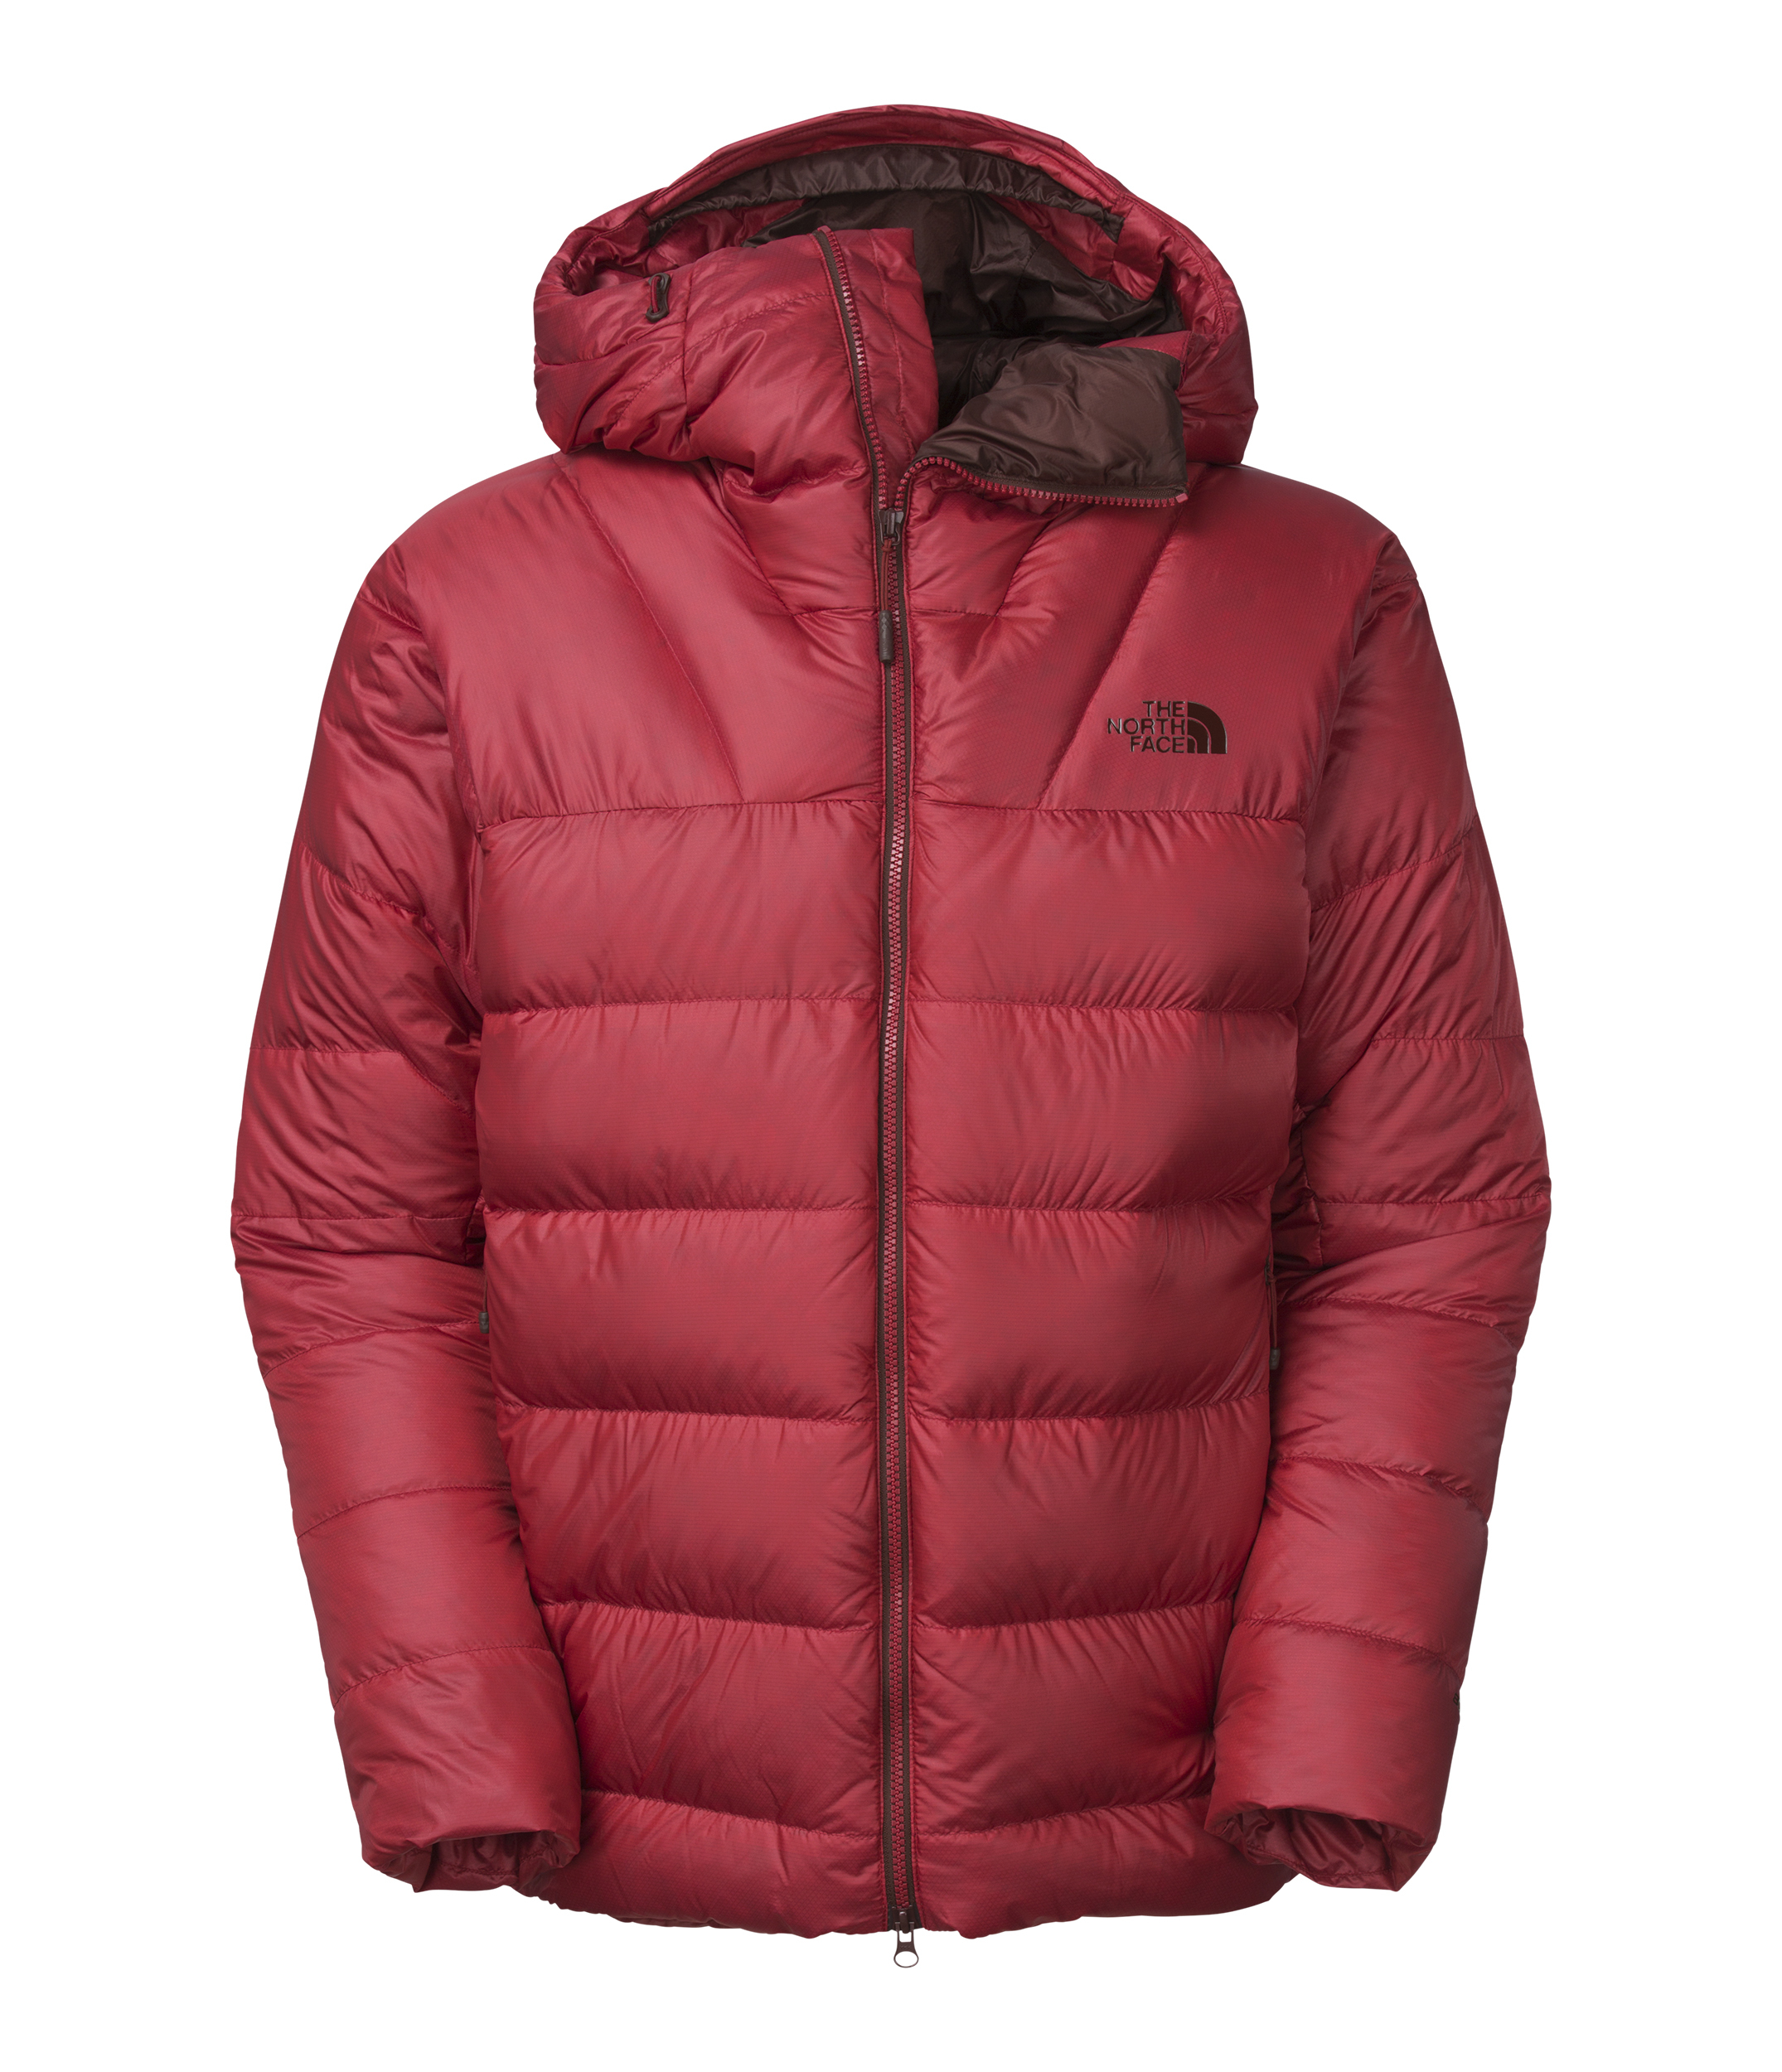 north face fall line